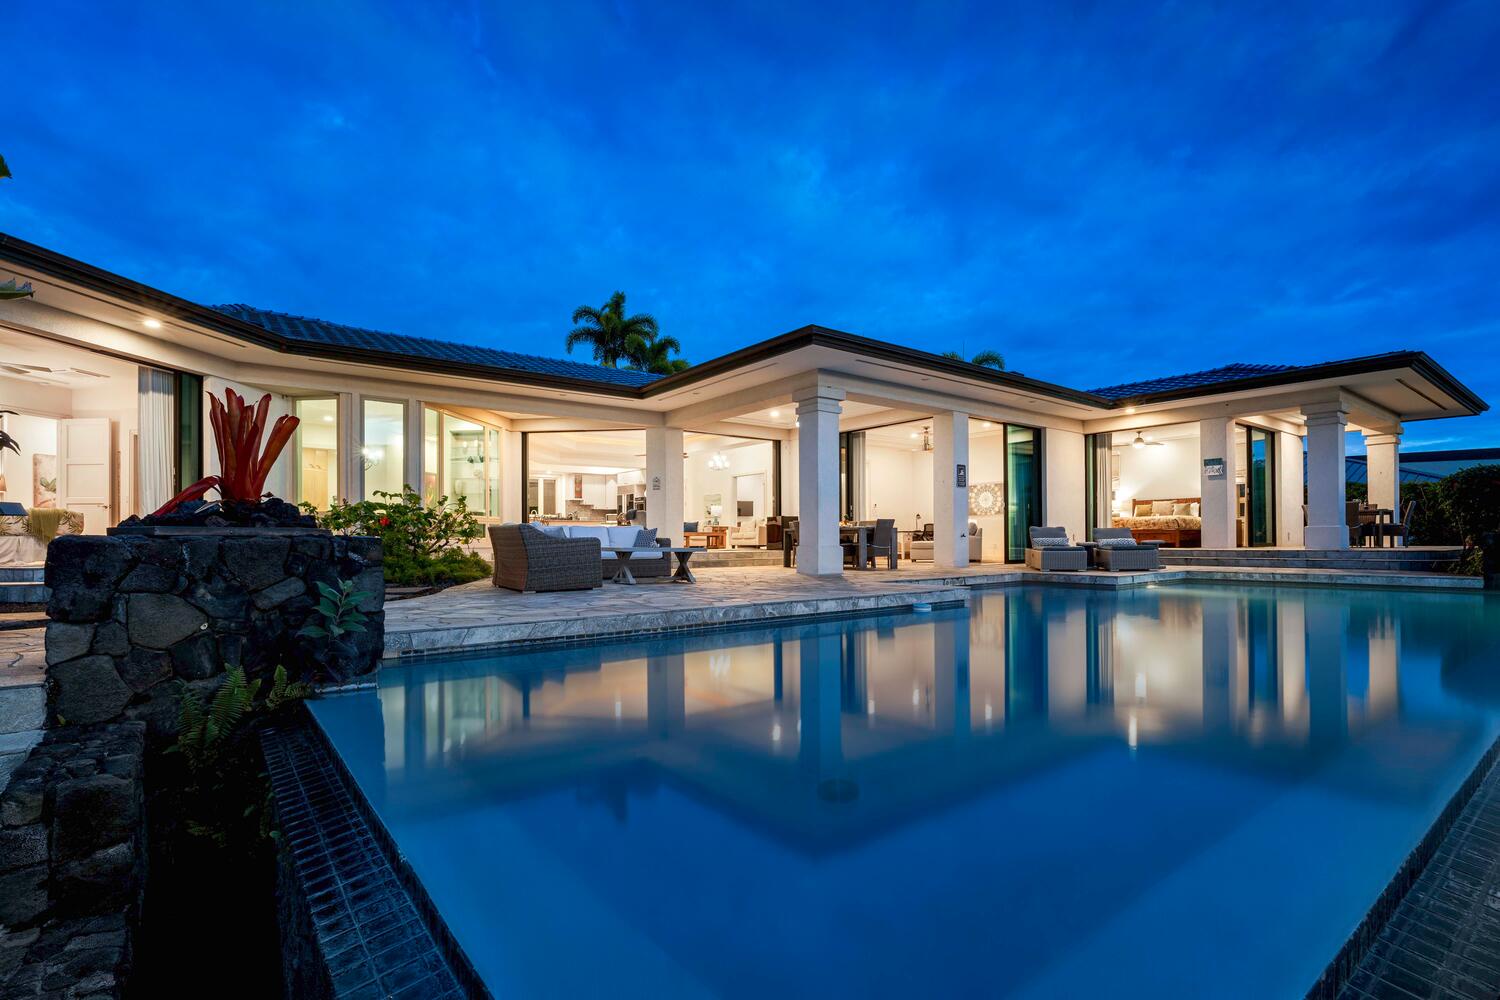 Kailua Kona Vacation Rentals, Blue Hawaii - Your perfect home away from home!